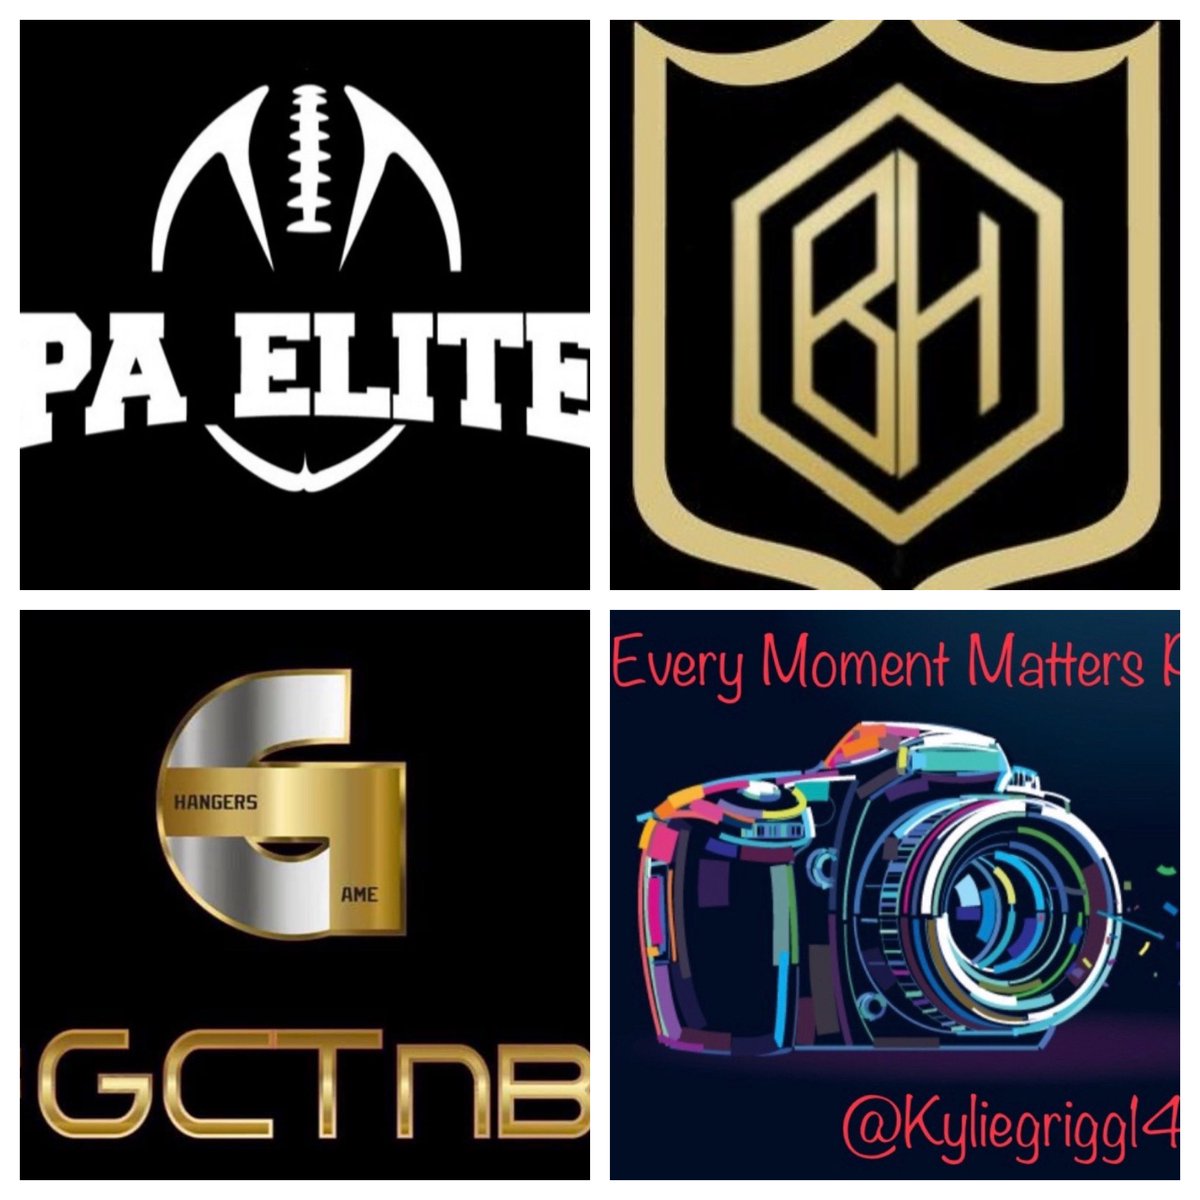 The Full tournament schedule was sent to all teams via email. The schedule will also be loaded on Zorts by Thursday 2/8/24. So many teams this year that games have to start Friday night 2/9/24 with the 12u Division.

#ThankYou
#SoldOut
#Champ7v7
#PAELITE
#RoadToNationals